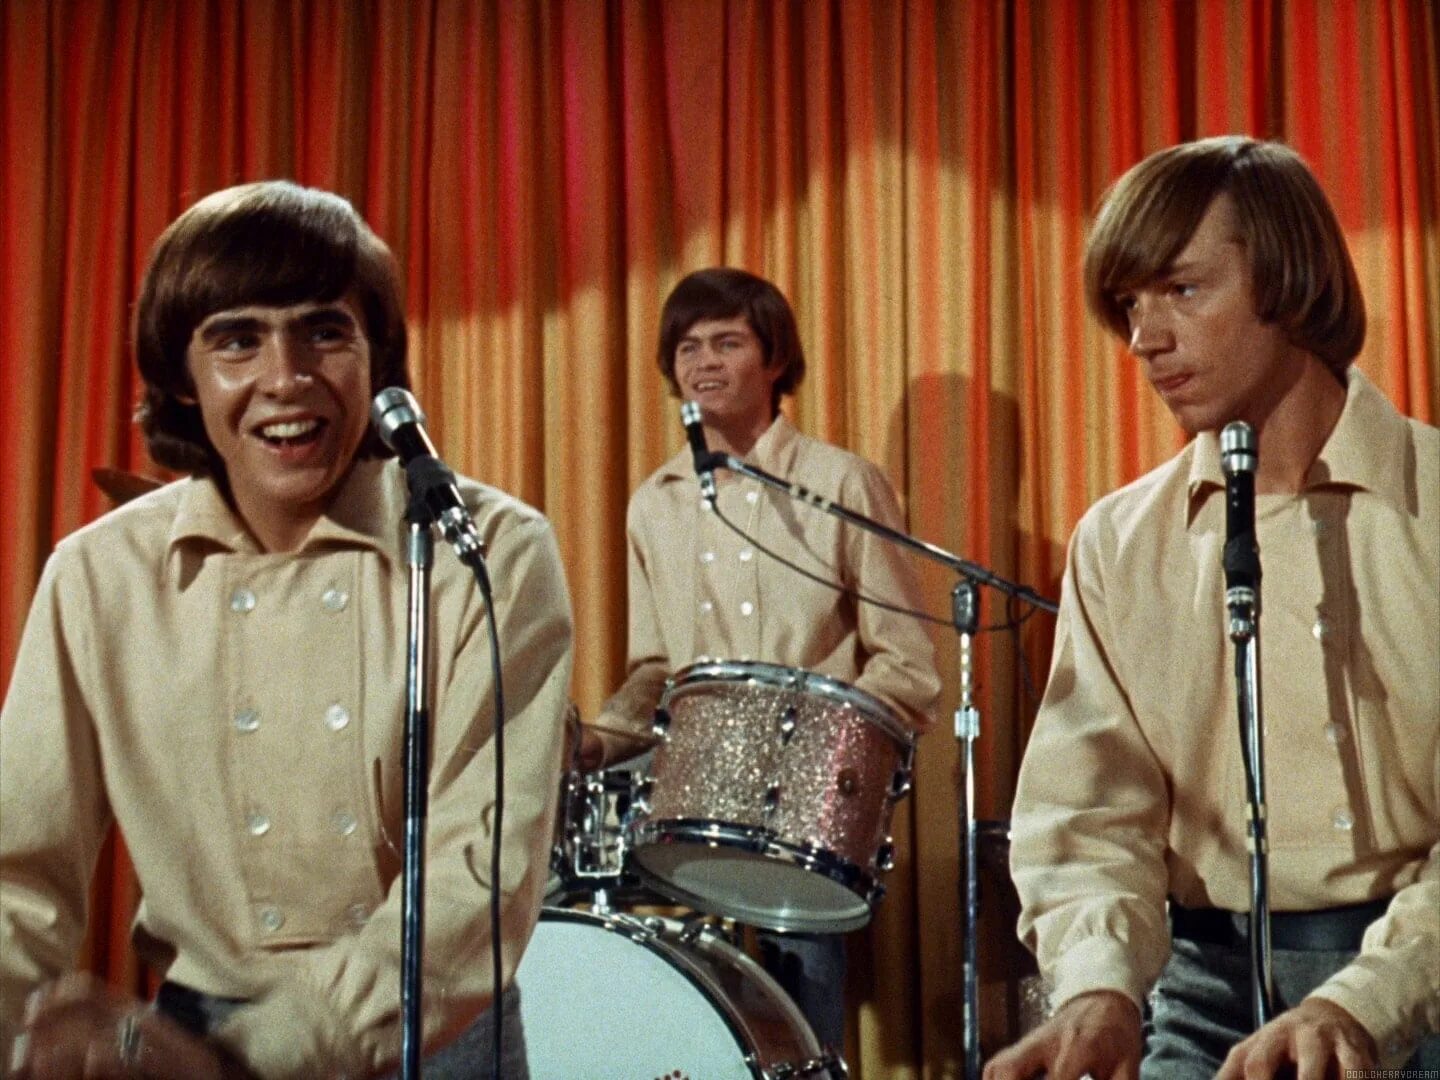 I’M A Believer the Monkees. Группа the Monkees. The Monkees фото. The Monkees 1964 обложка.